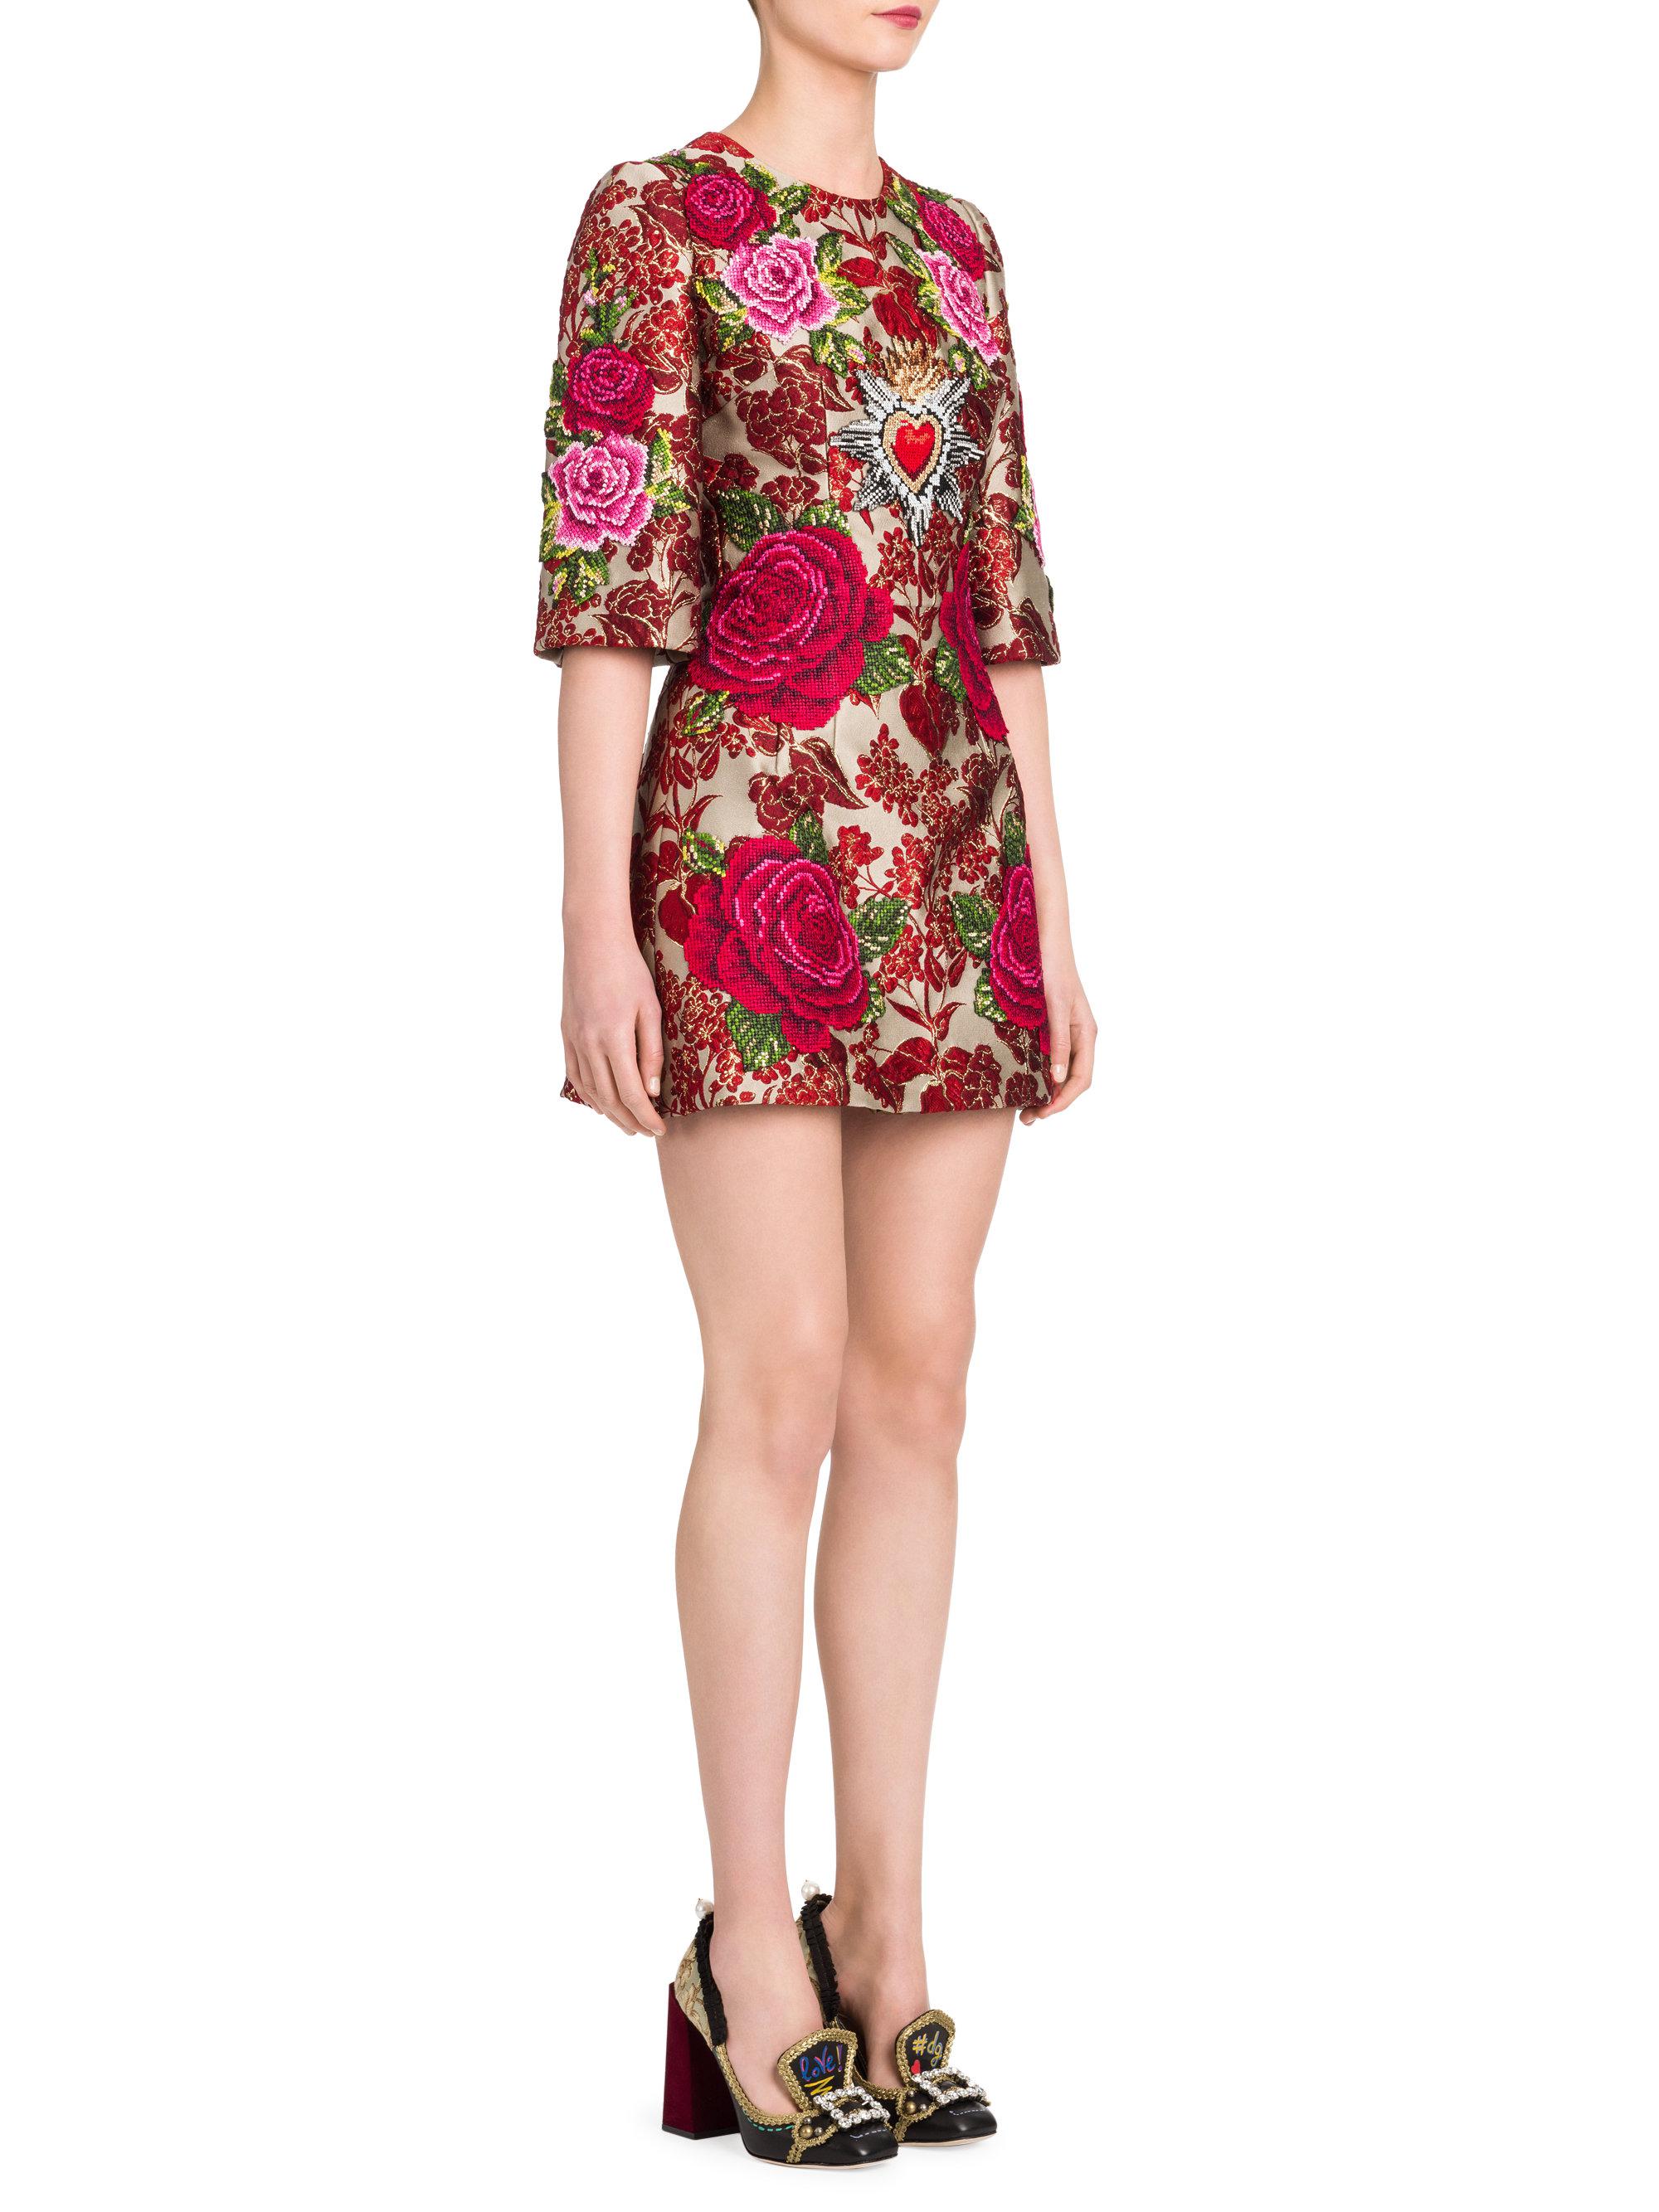 Lyst - Dolce & Gabbana Floral Jacquard Dress in Pink